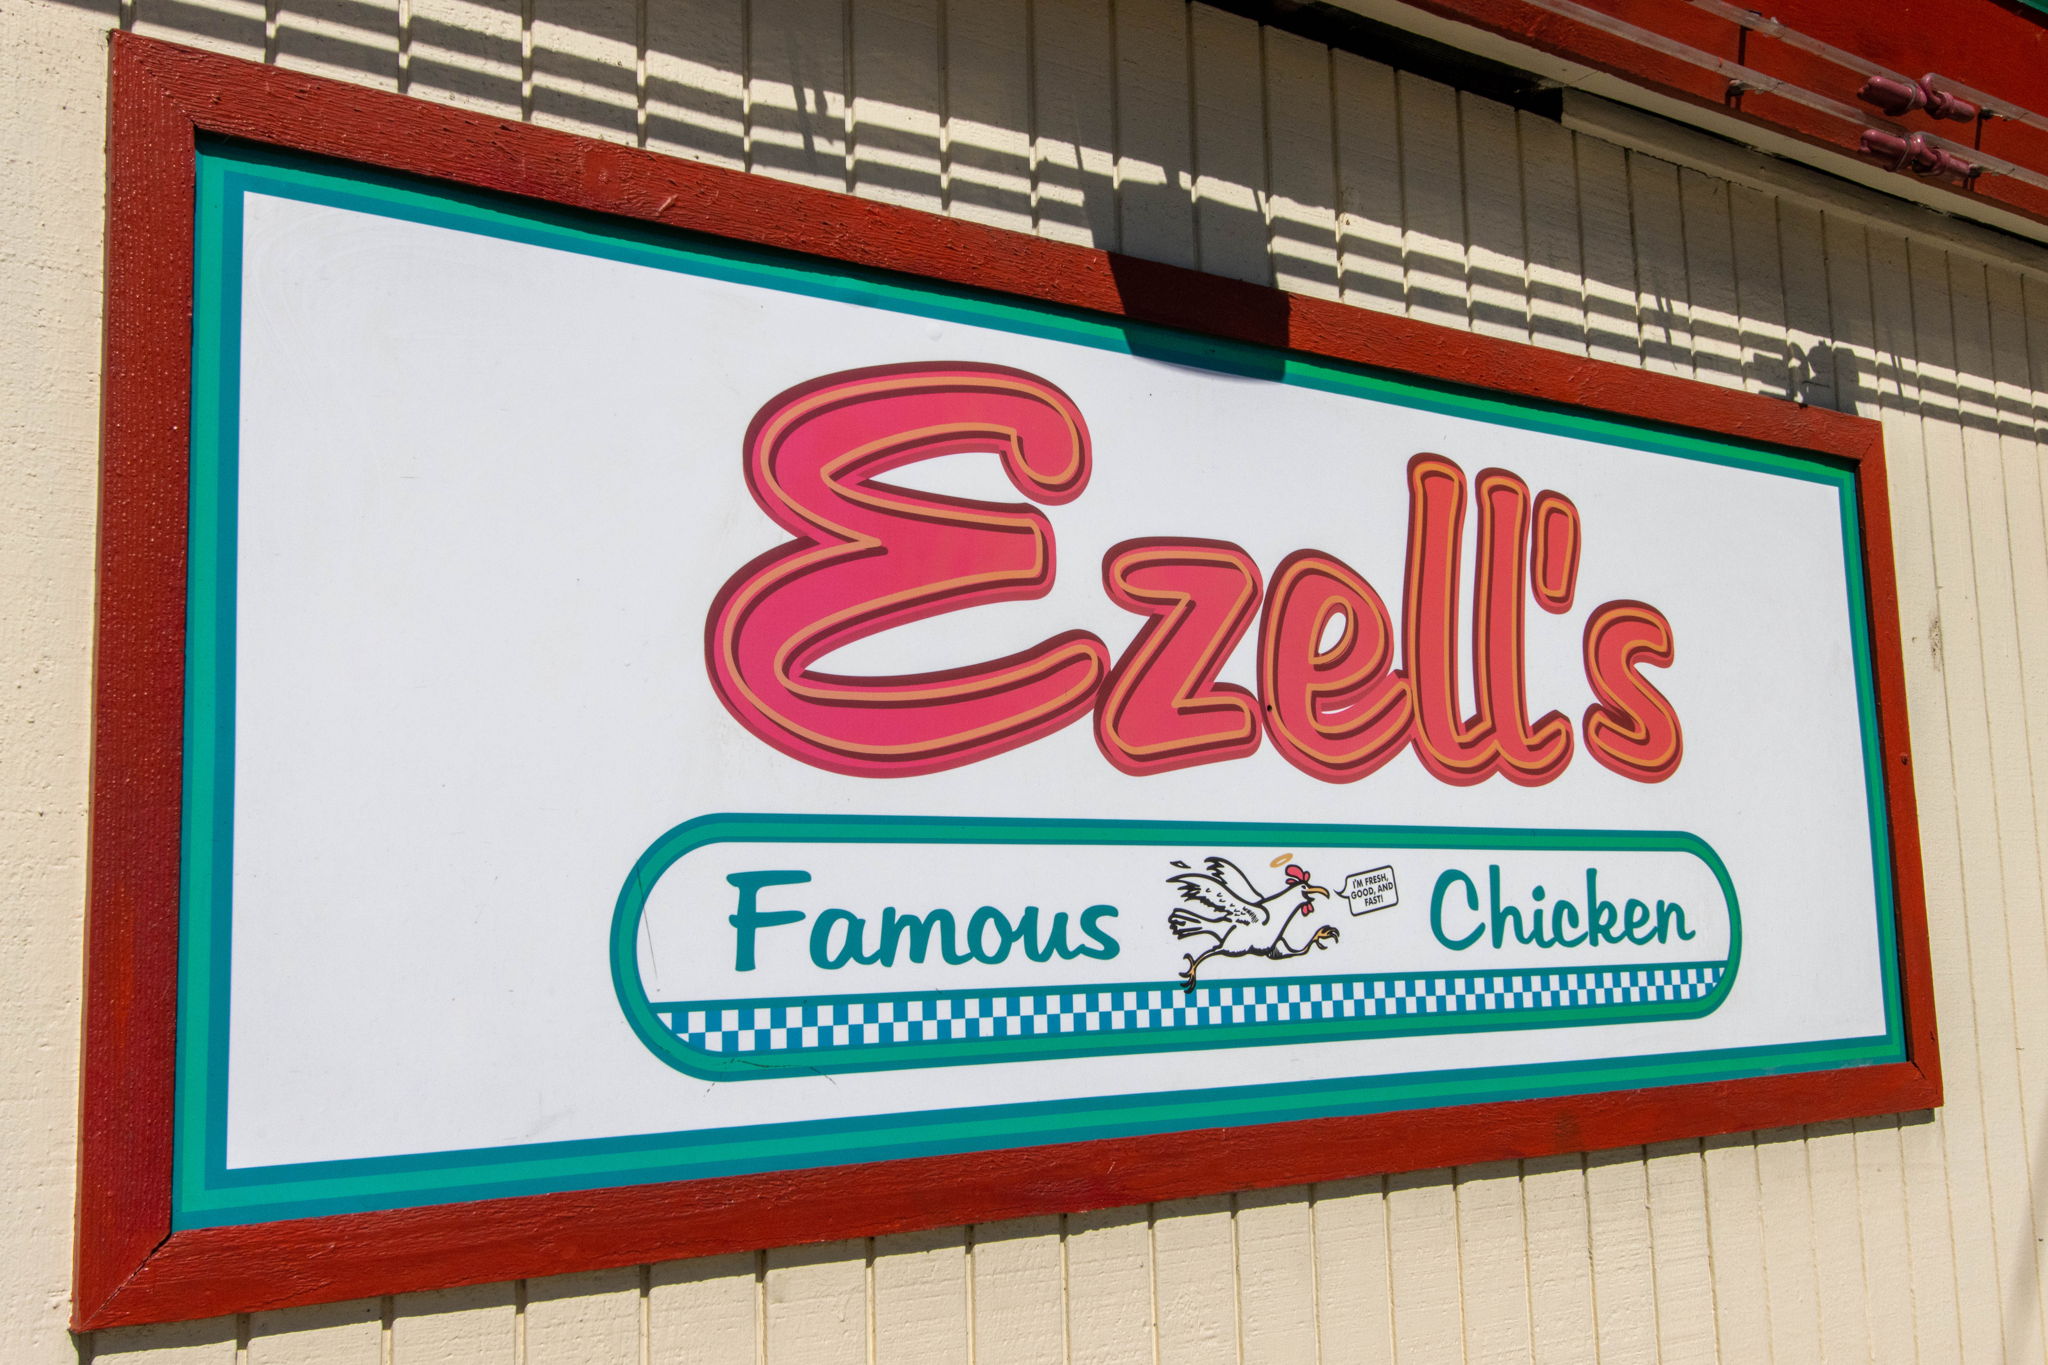 EZELL'S FAMOUS CHICKEN